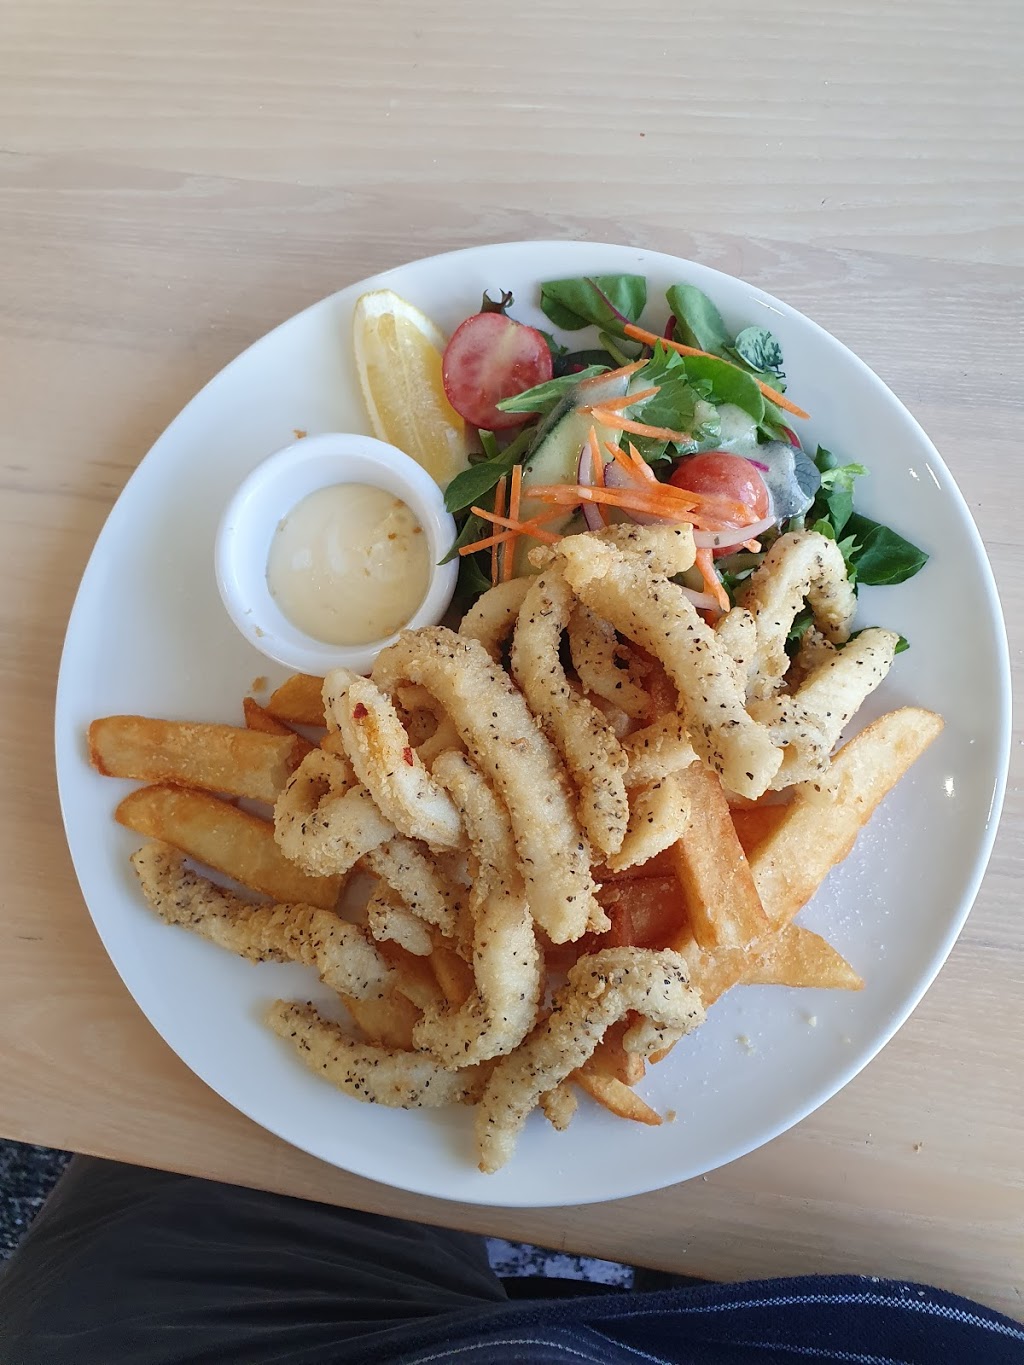 Soldiers Point Bowling Club | 118 Soldiers Point Rd, Soldiers Point NSW 2317, Australia | Phone: (02) 4982 7173